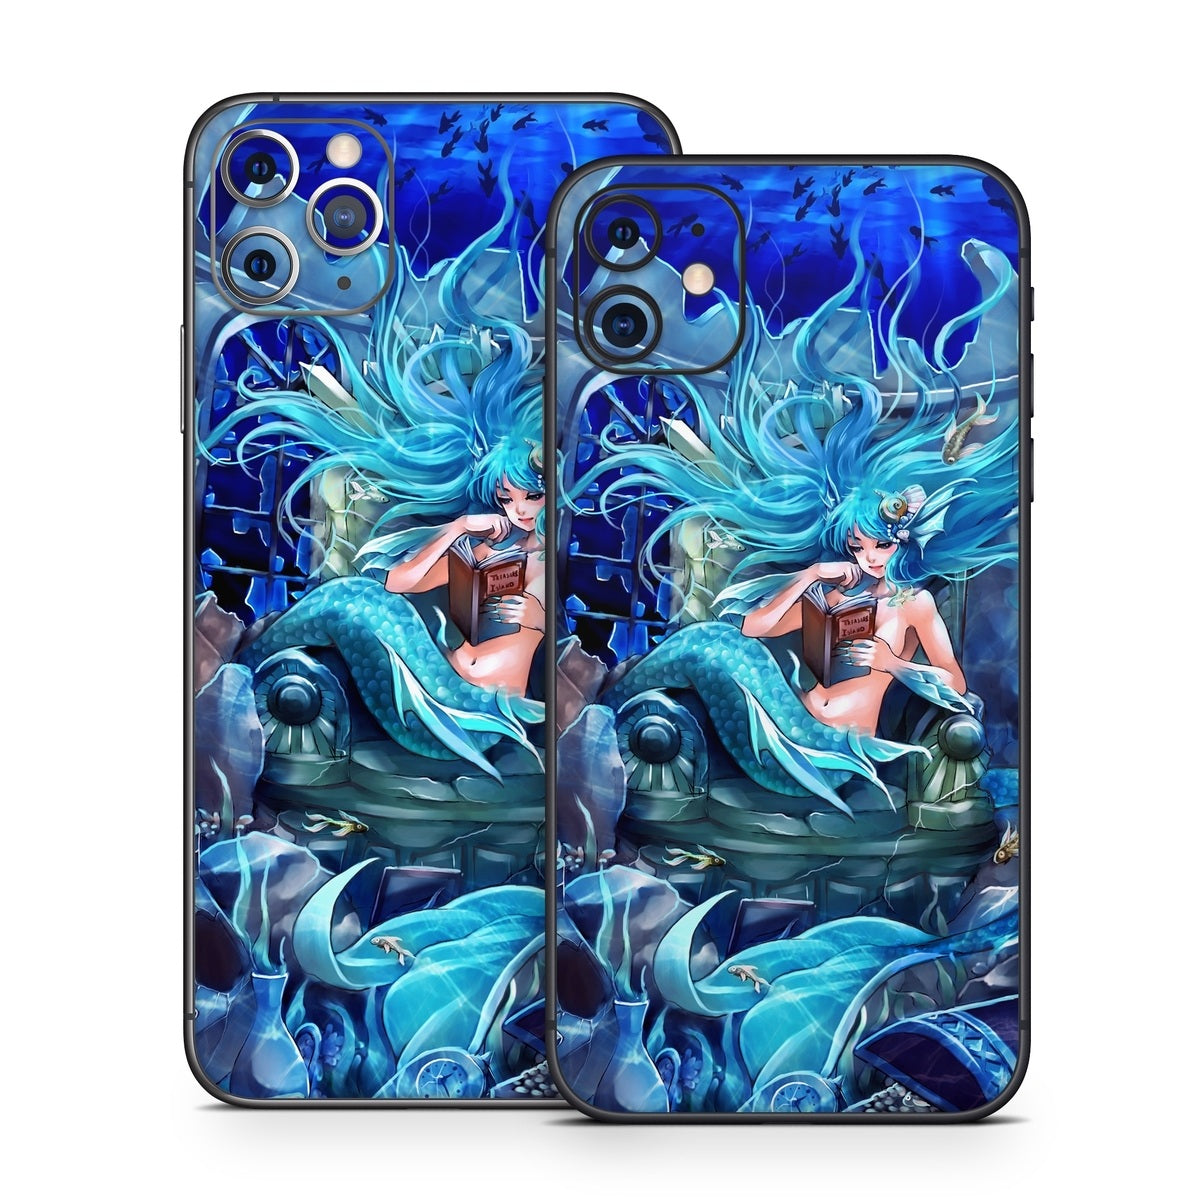 In Her Own World - Apple iPhone 11 Skin